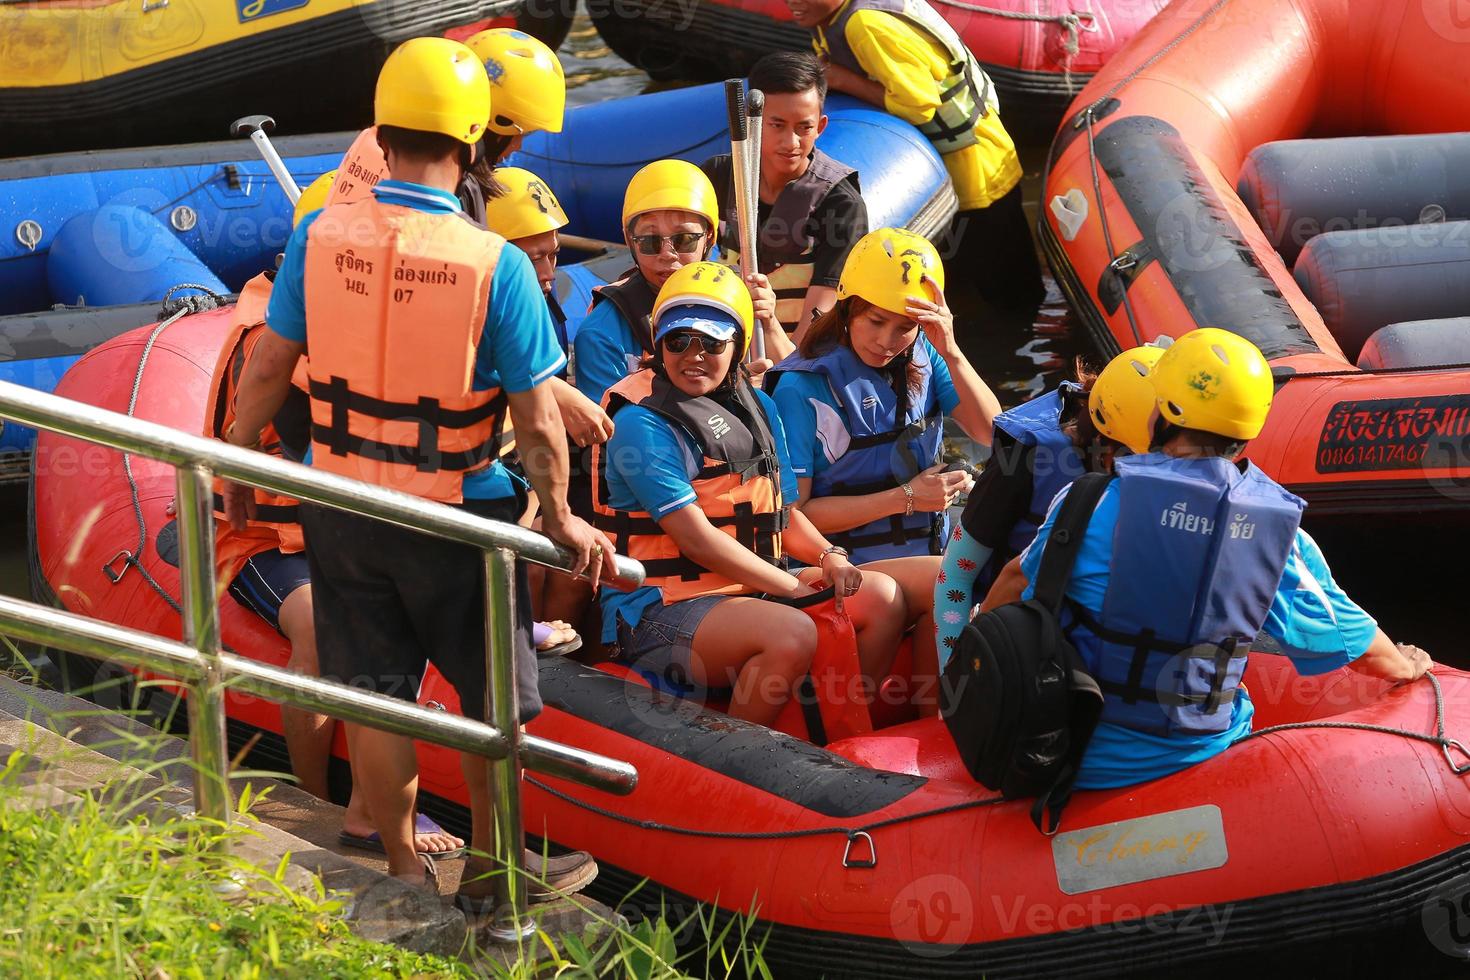 NAKHONNAYOK, THAILAND,DECEMBER 19  Group of adventurer doing white water rafting at dam, on December 19, 2015,The river is popular for its scenic nature view. photo